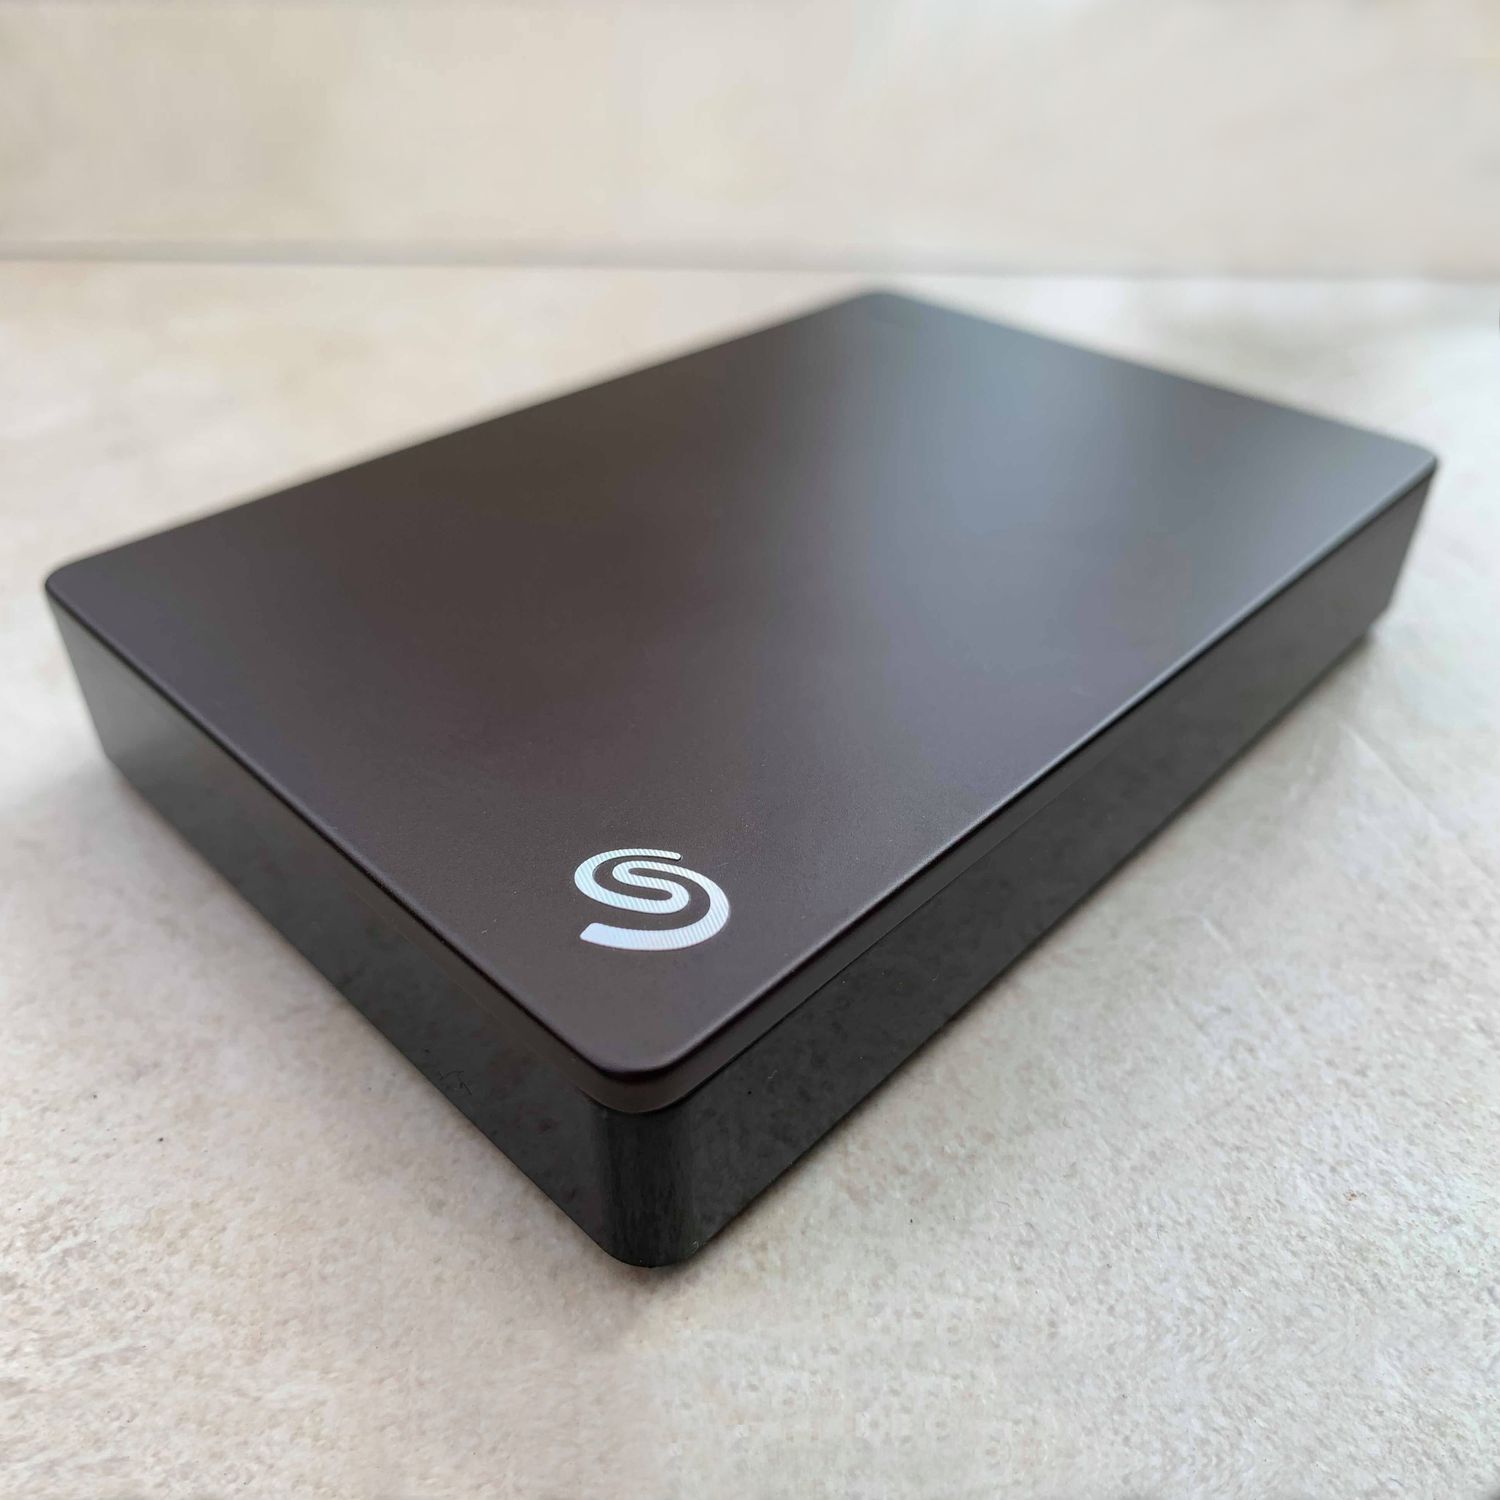 How Do I Backup My Computer To Seagate External Hard Drive